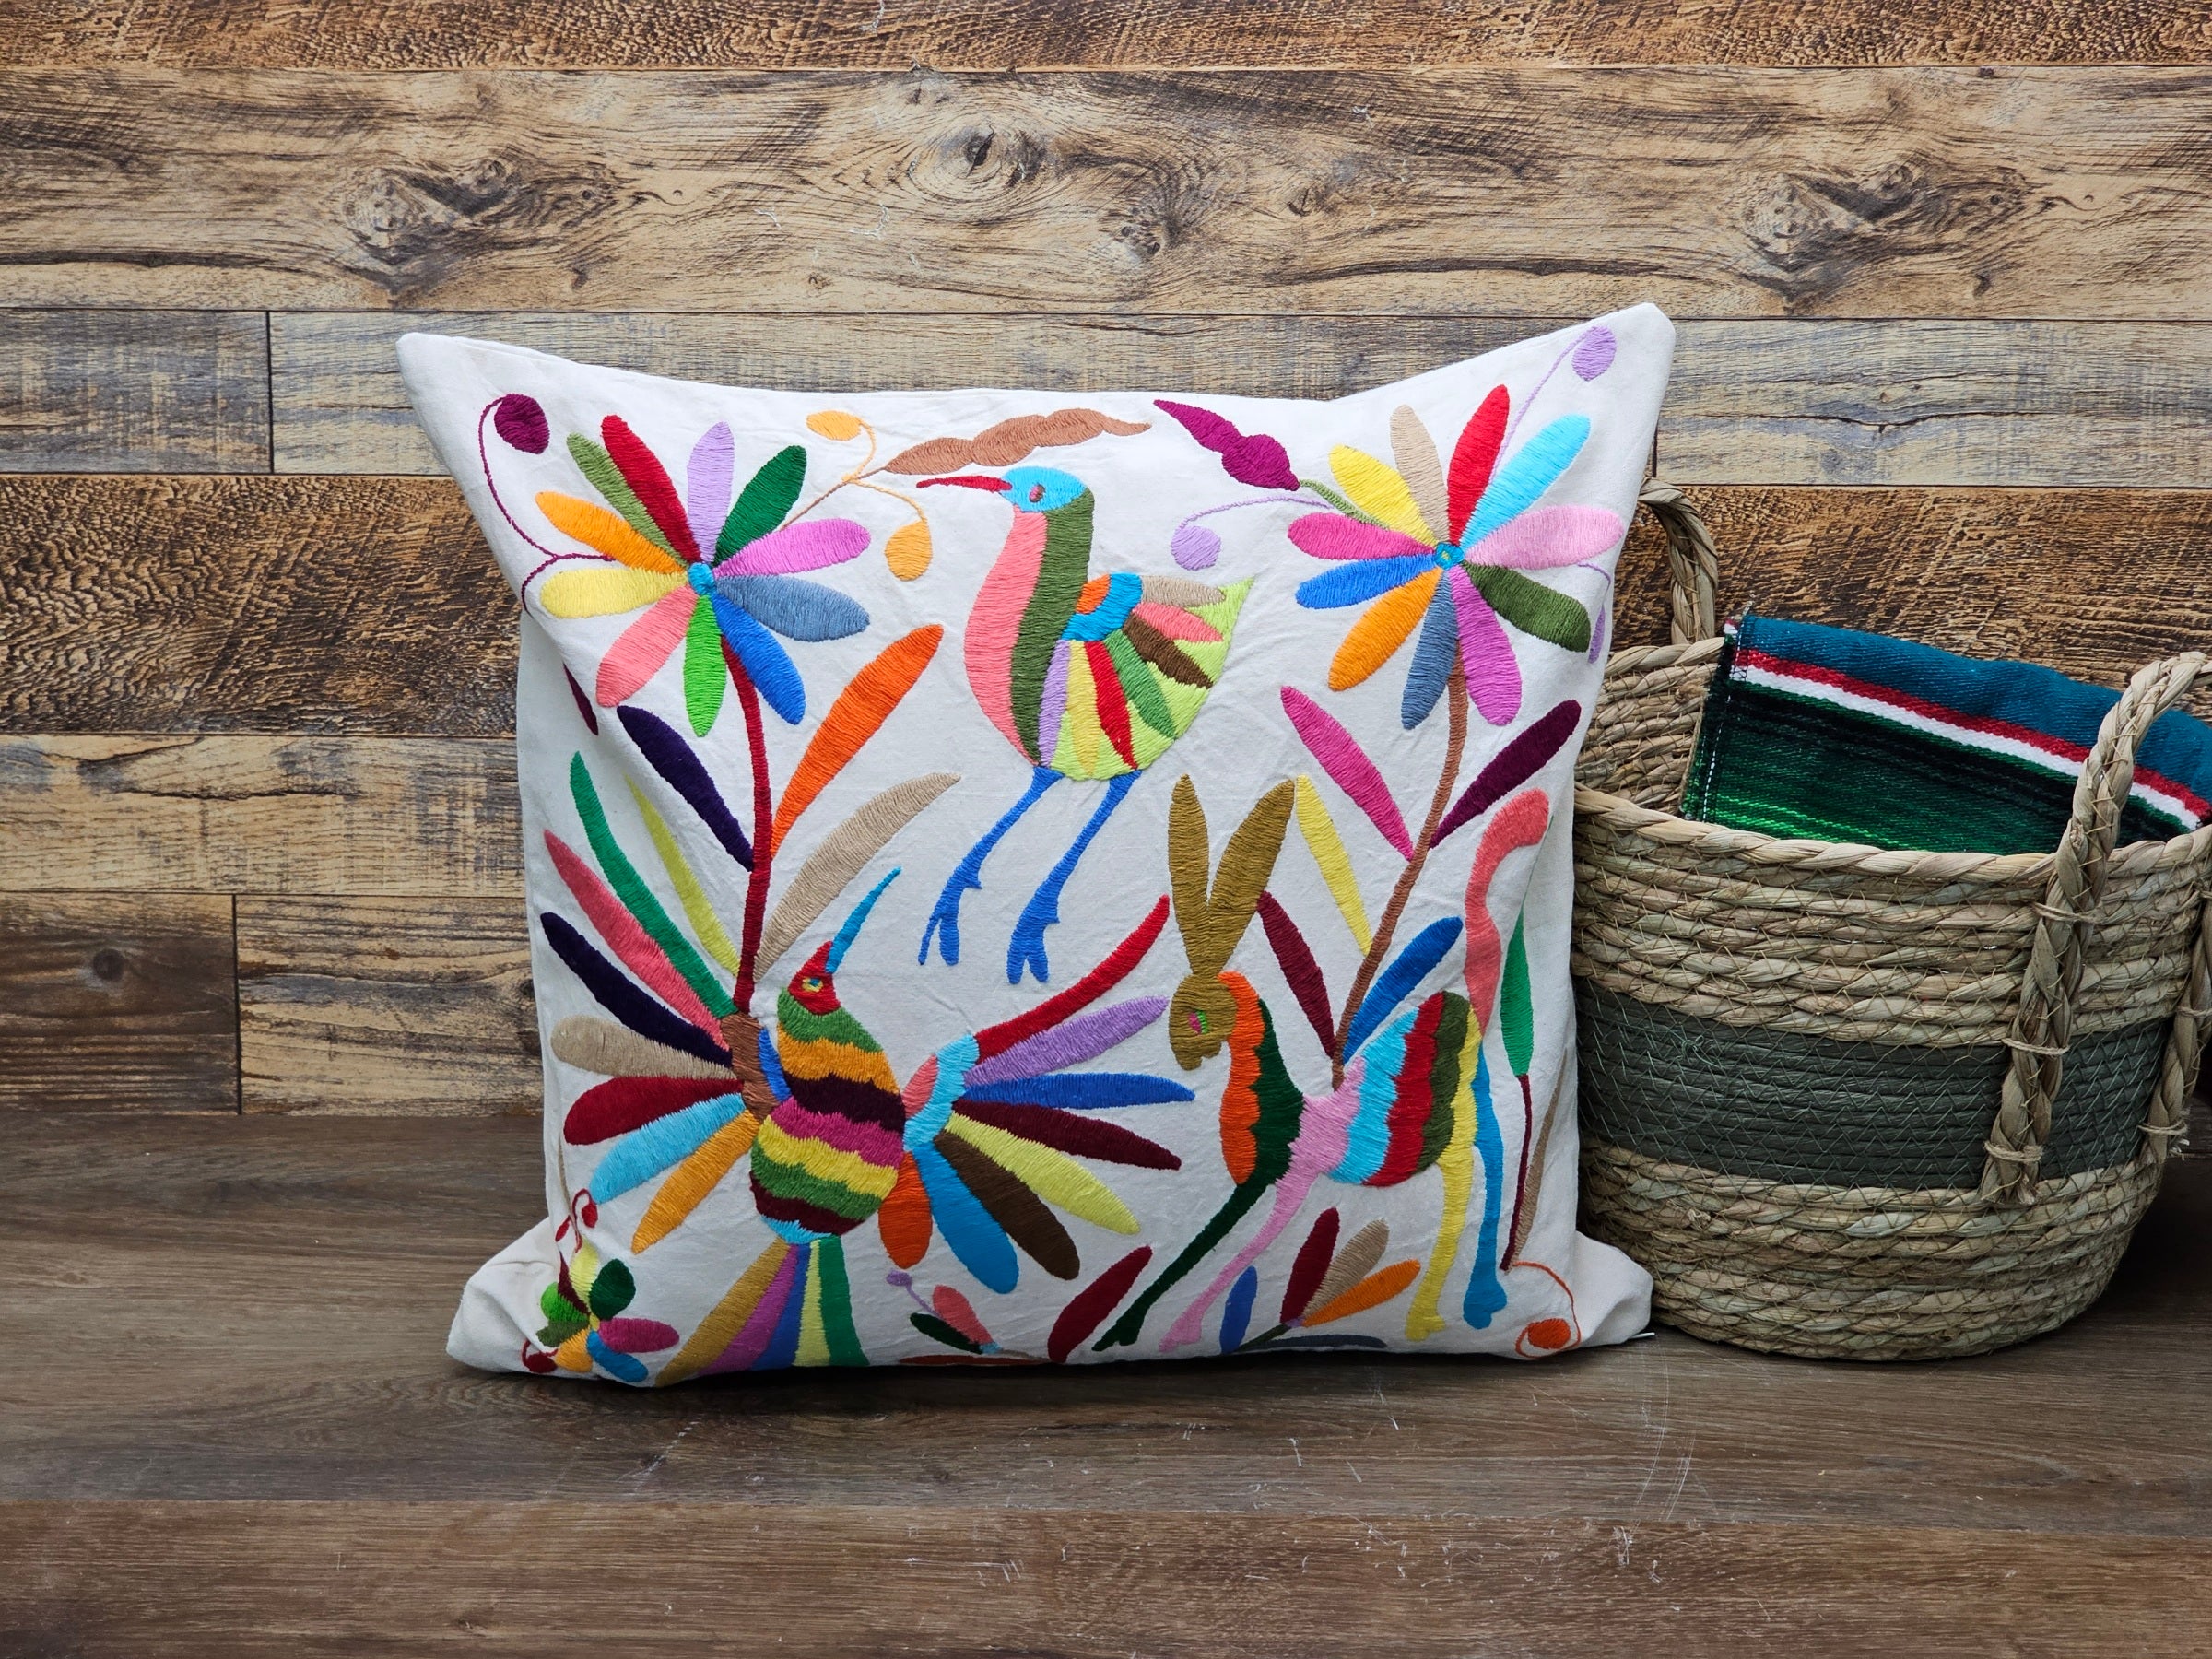 Otomi Tenango Pillow Cover Hand Embroidered with Birds, Flowers, and Animals in Vibrant Colors. Handmade in Mexico. Ships from the USA. Buy now at www.felipeandgrace.com. 